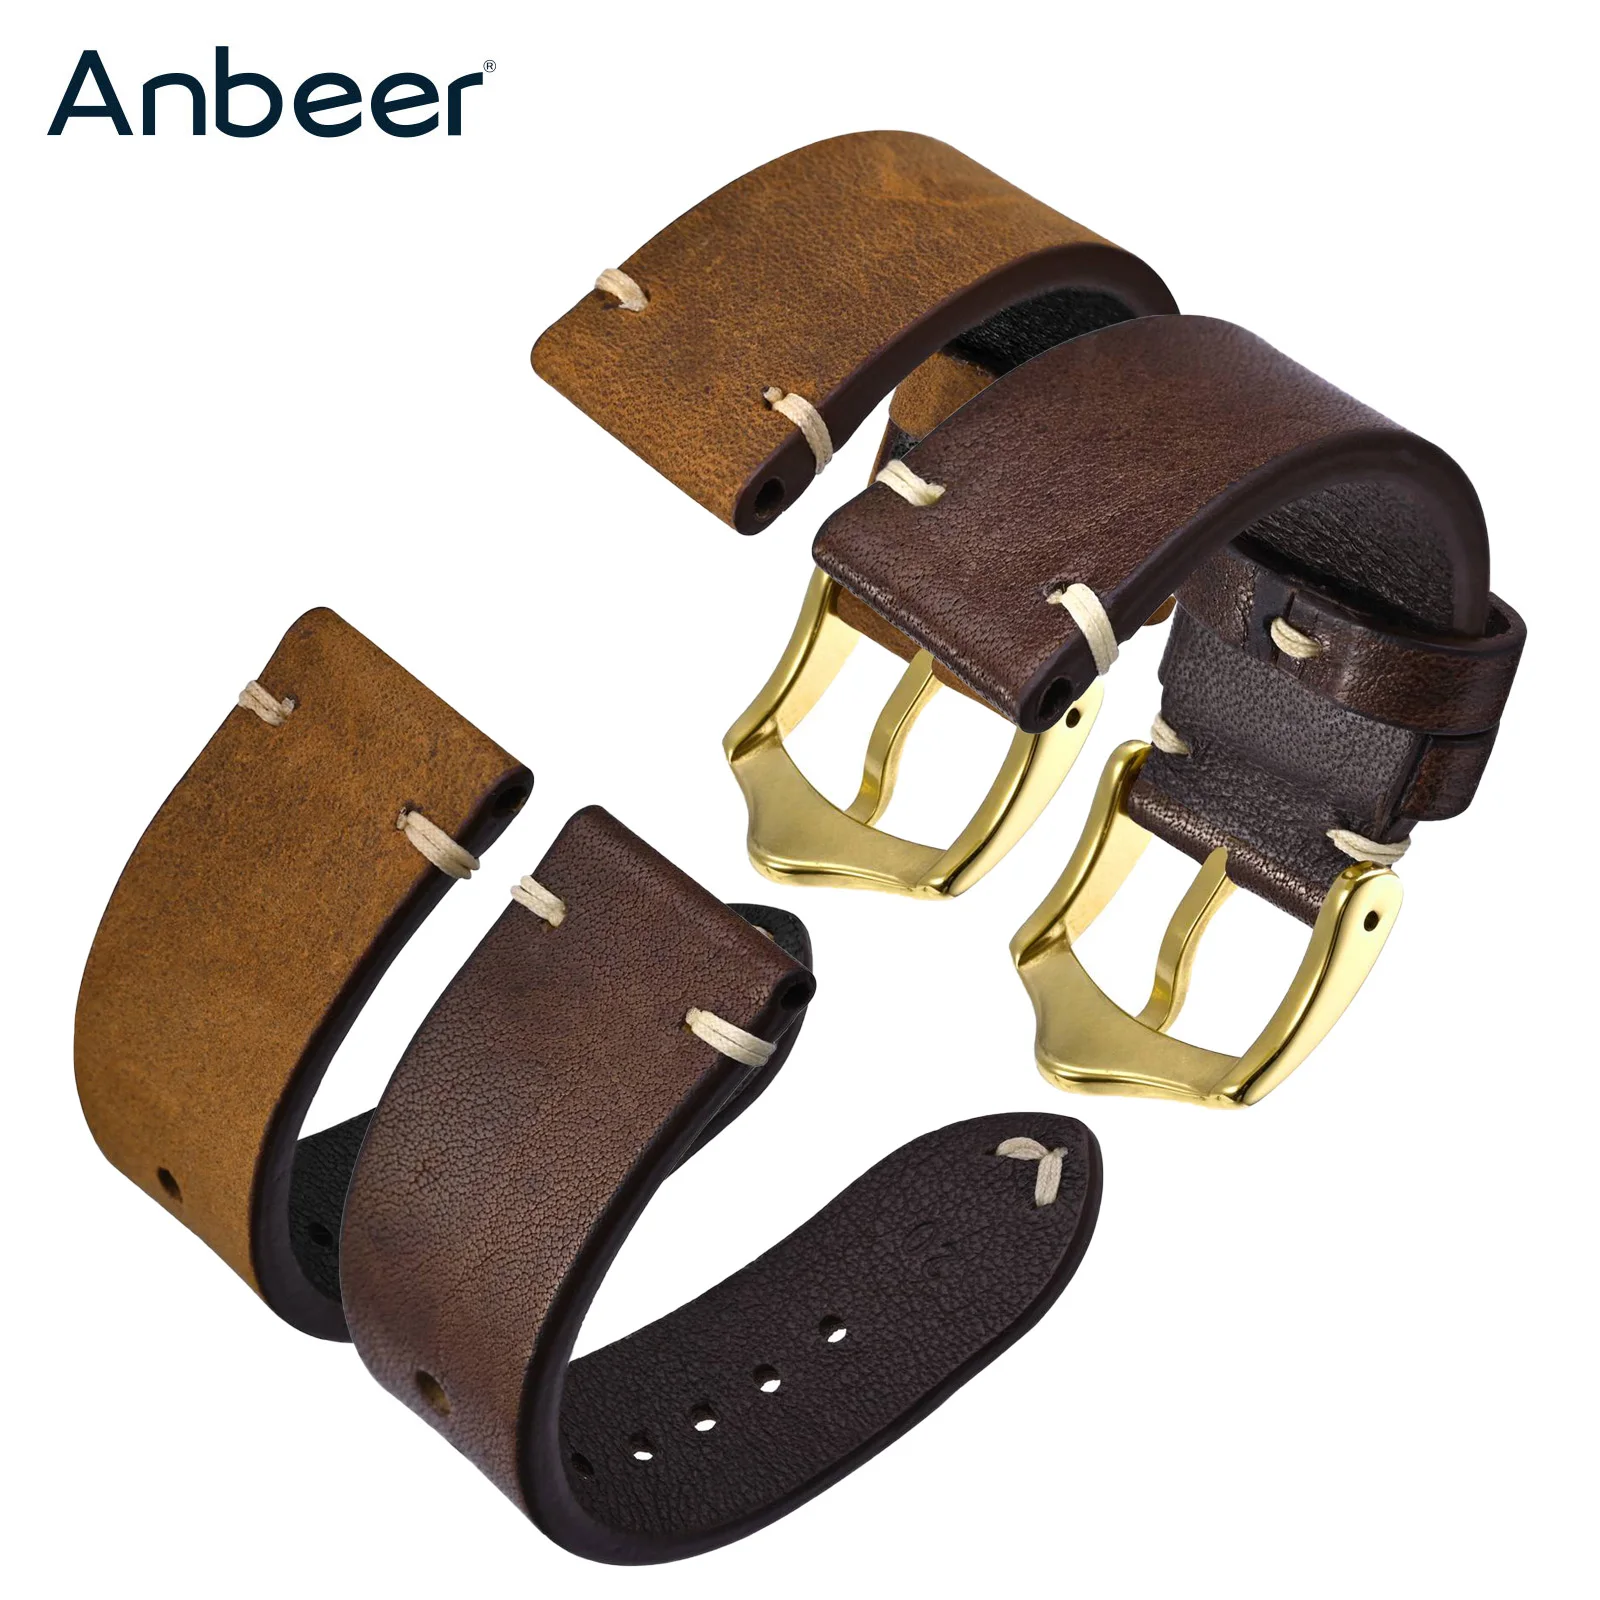 

Anbeer Genuine Leather Watch Strap 18mm 19mm 20mm 21mm 22mm Premium Watchband Bracelet Replacement with Gold Buckle